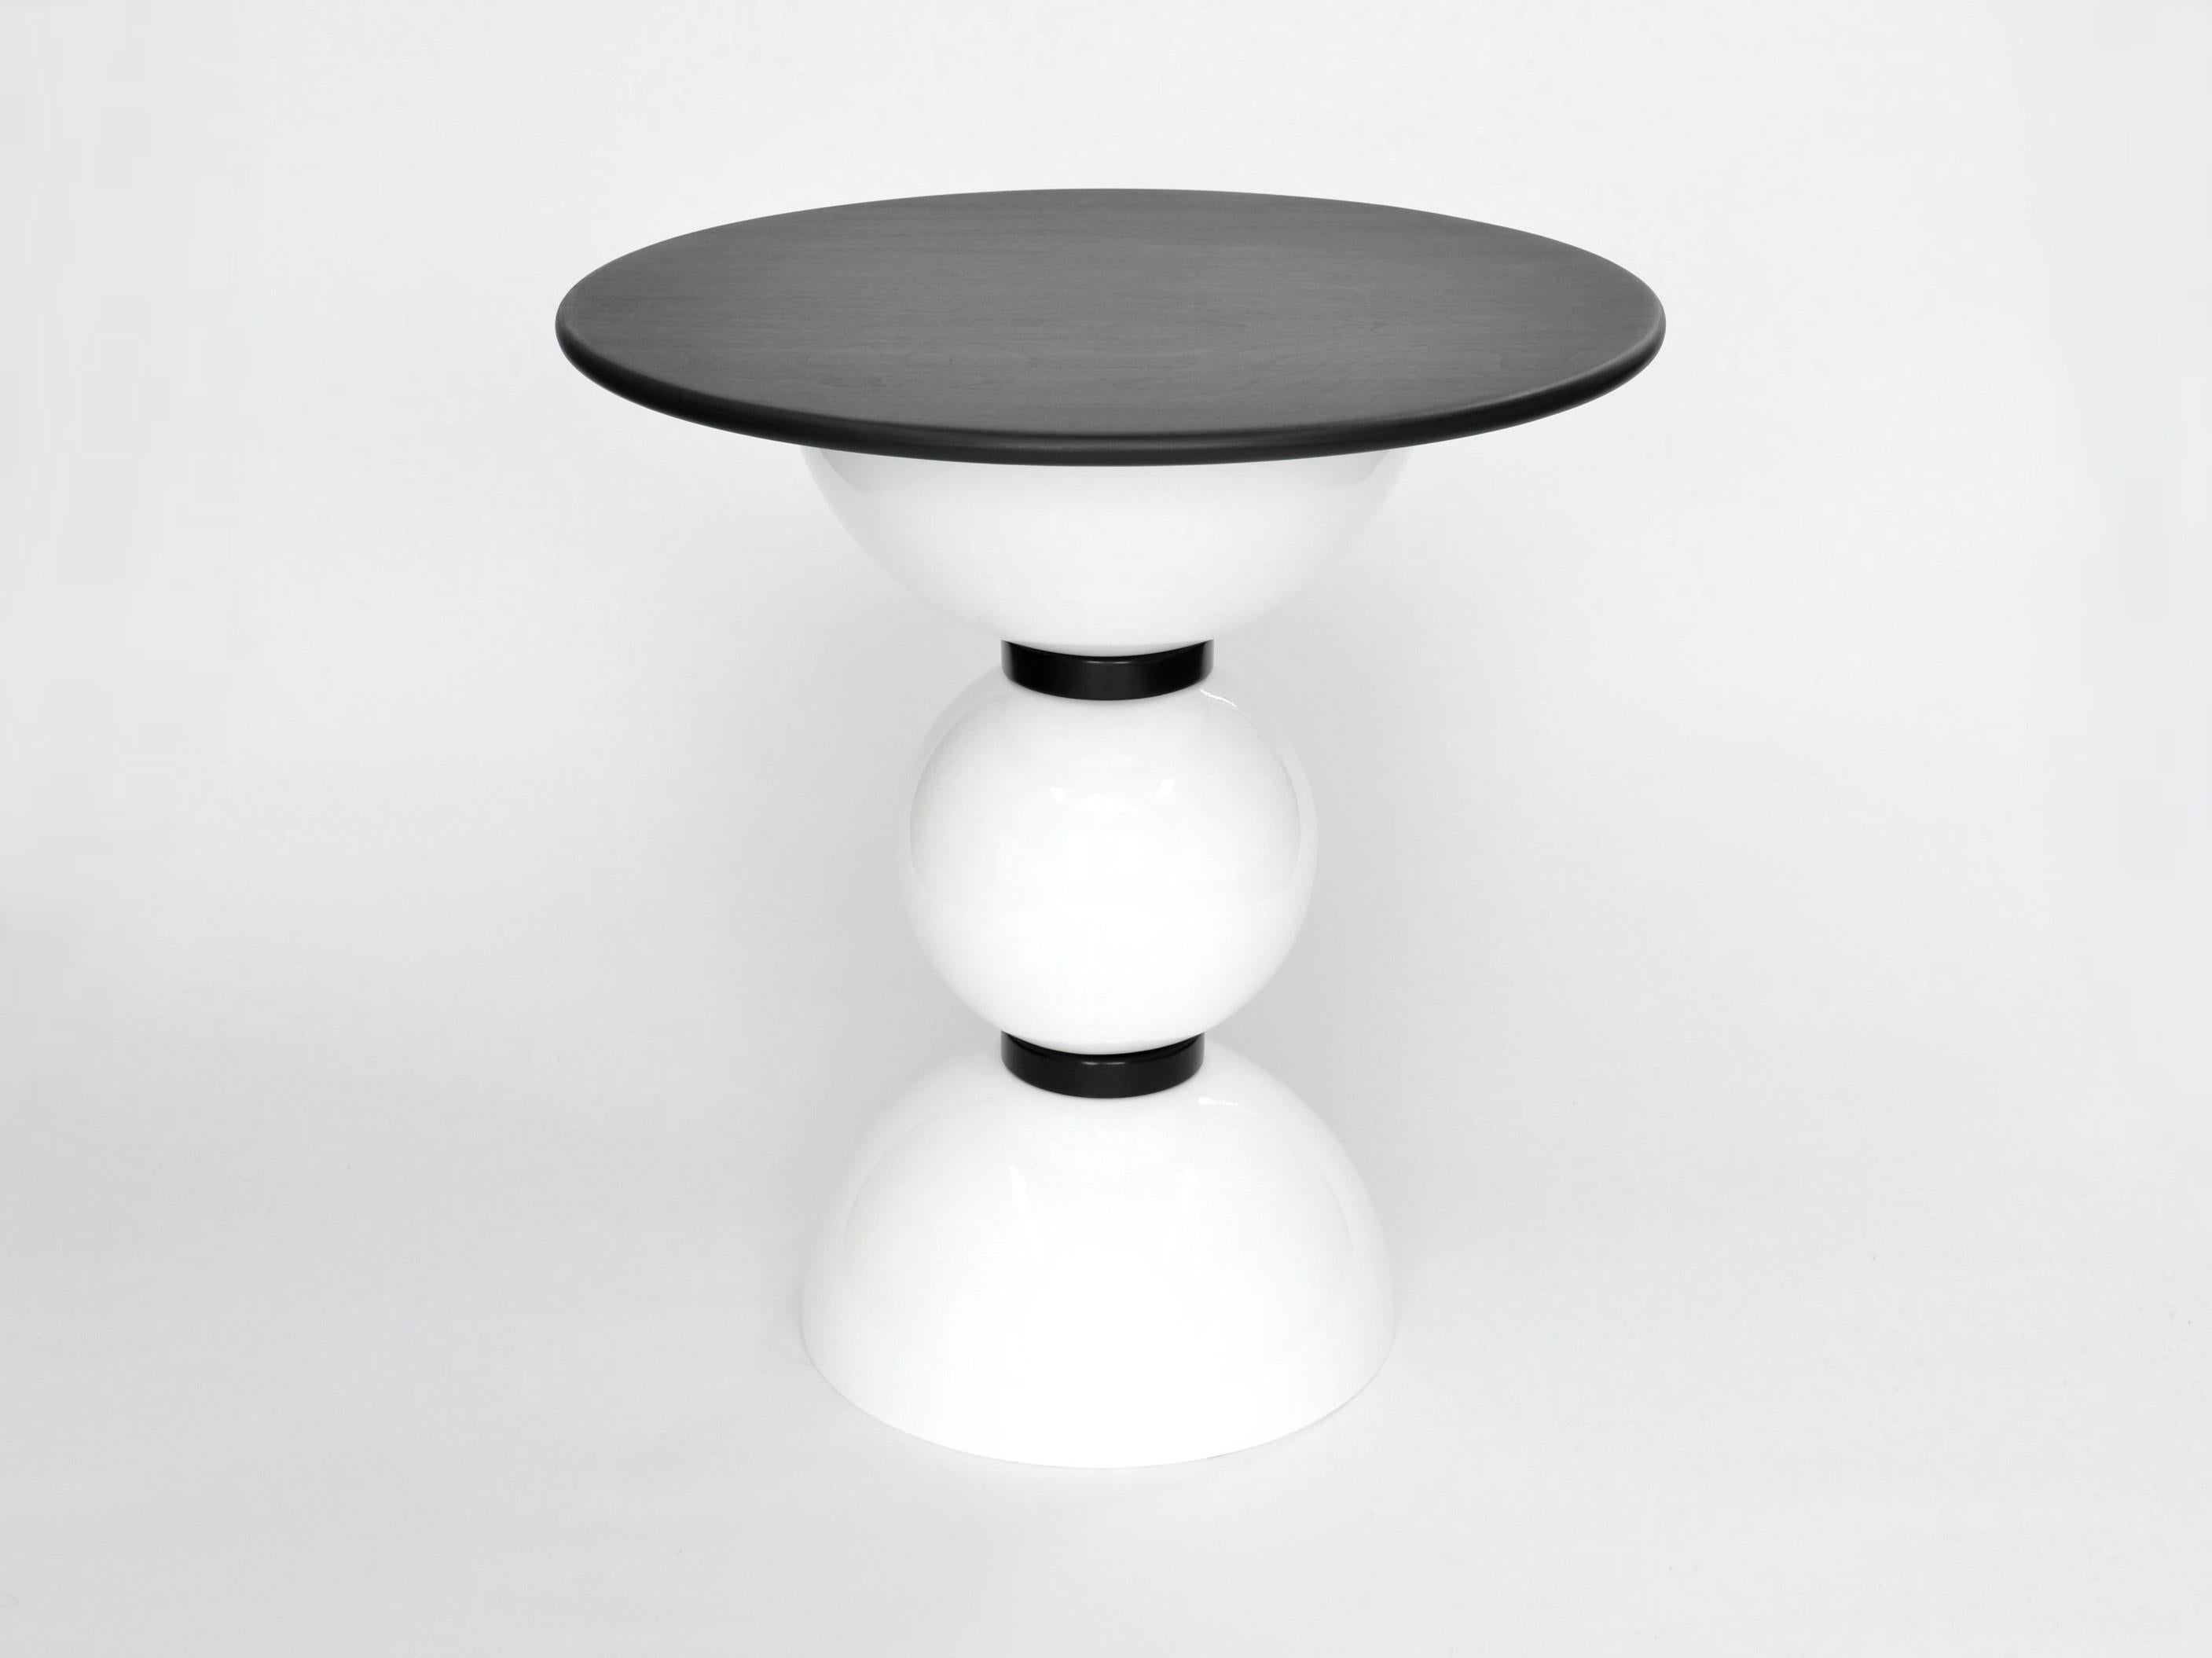 Contemporary side table designed and made by independent product and furniture designer Connor Holland.

The Saturn table is part of the Saturn six range, a series of designs inspired by space exploration and the Saturn V rocket. The rounded